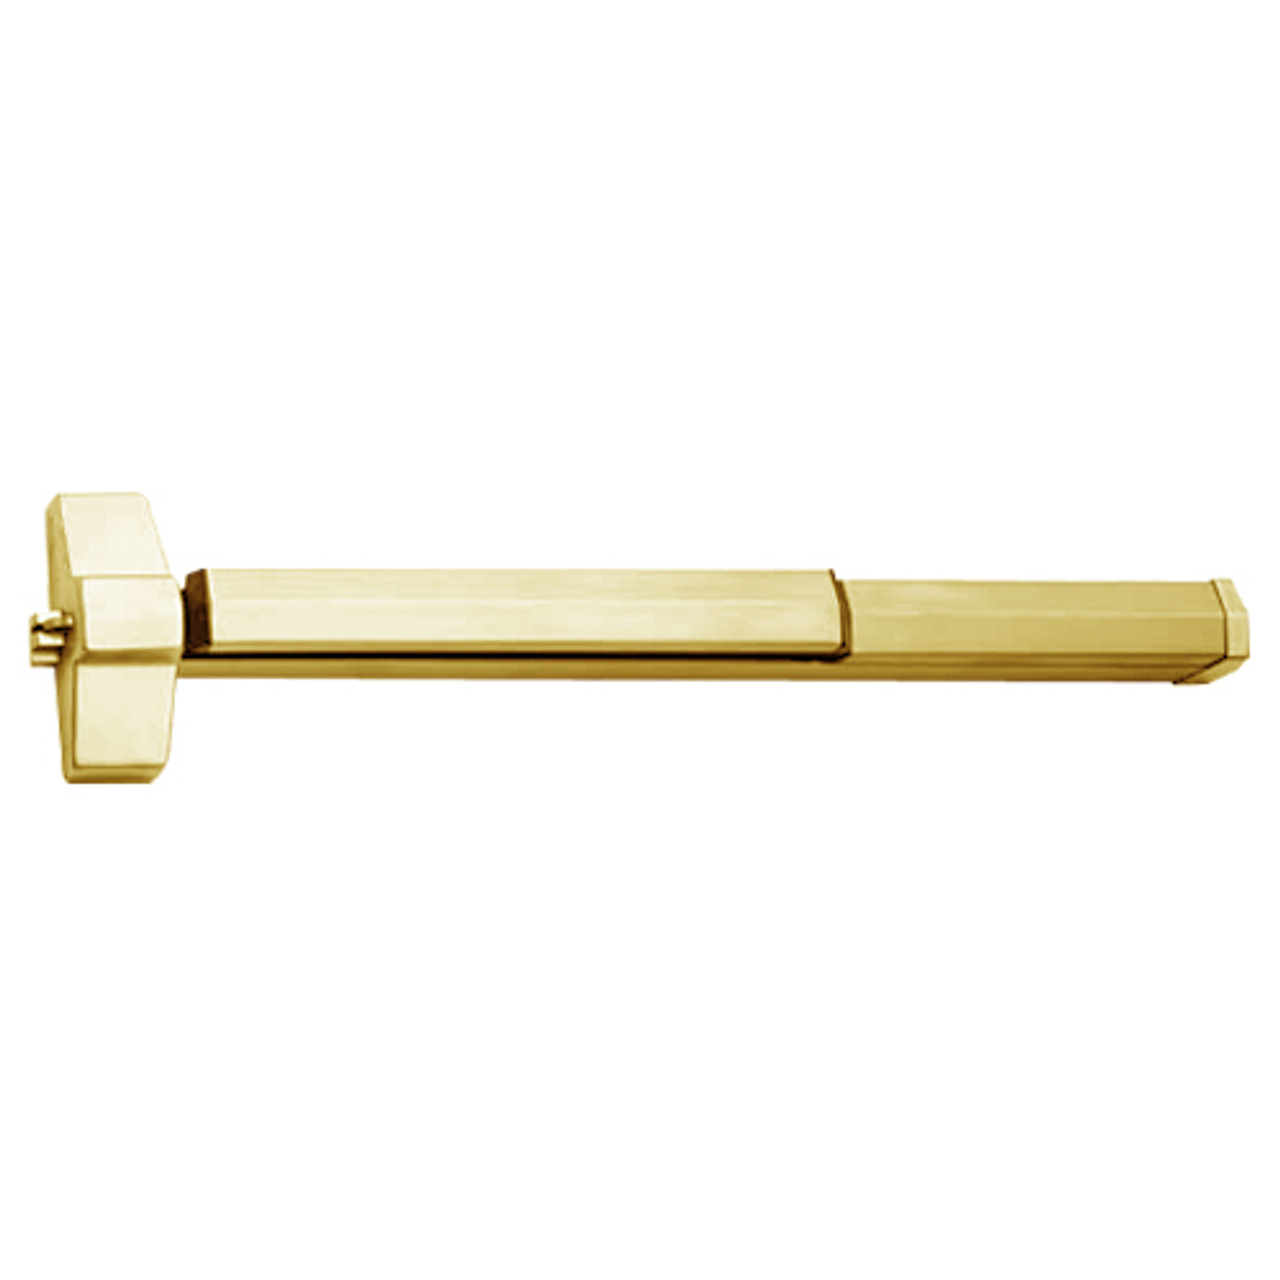 7150F-24-606 Yale 7000 Series Fire Rated SquareBolt Exit Device in Satin Brass